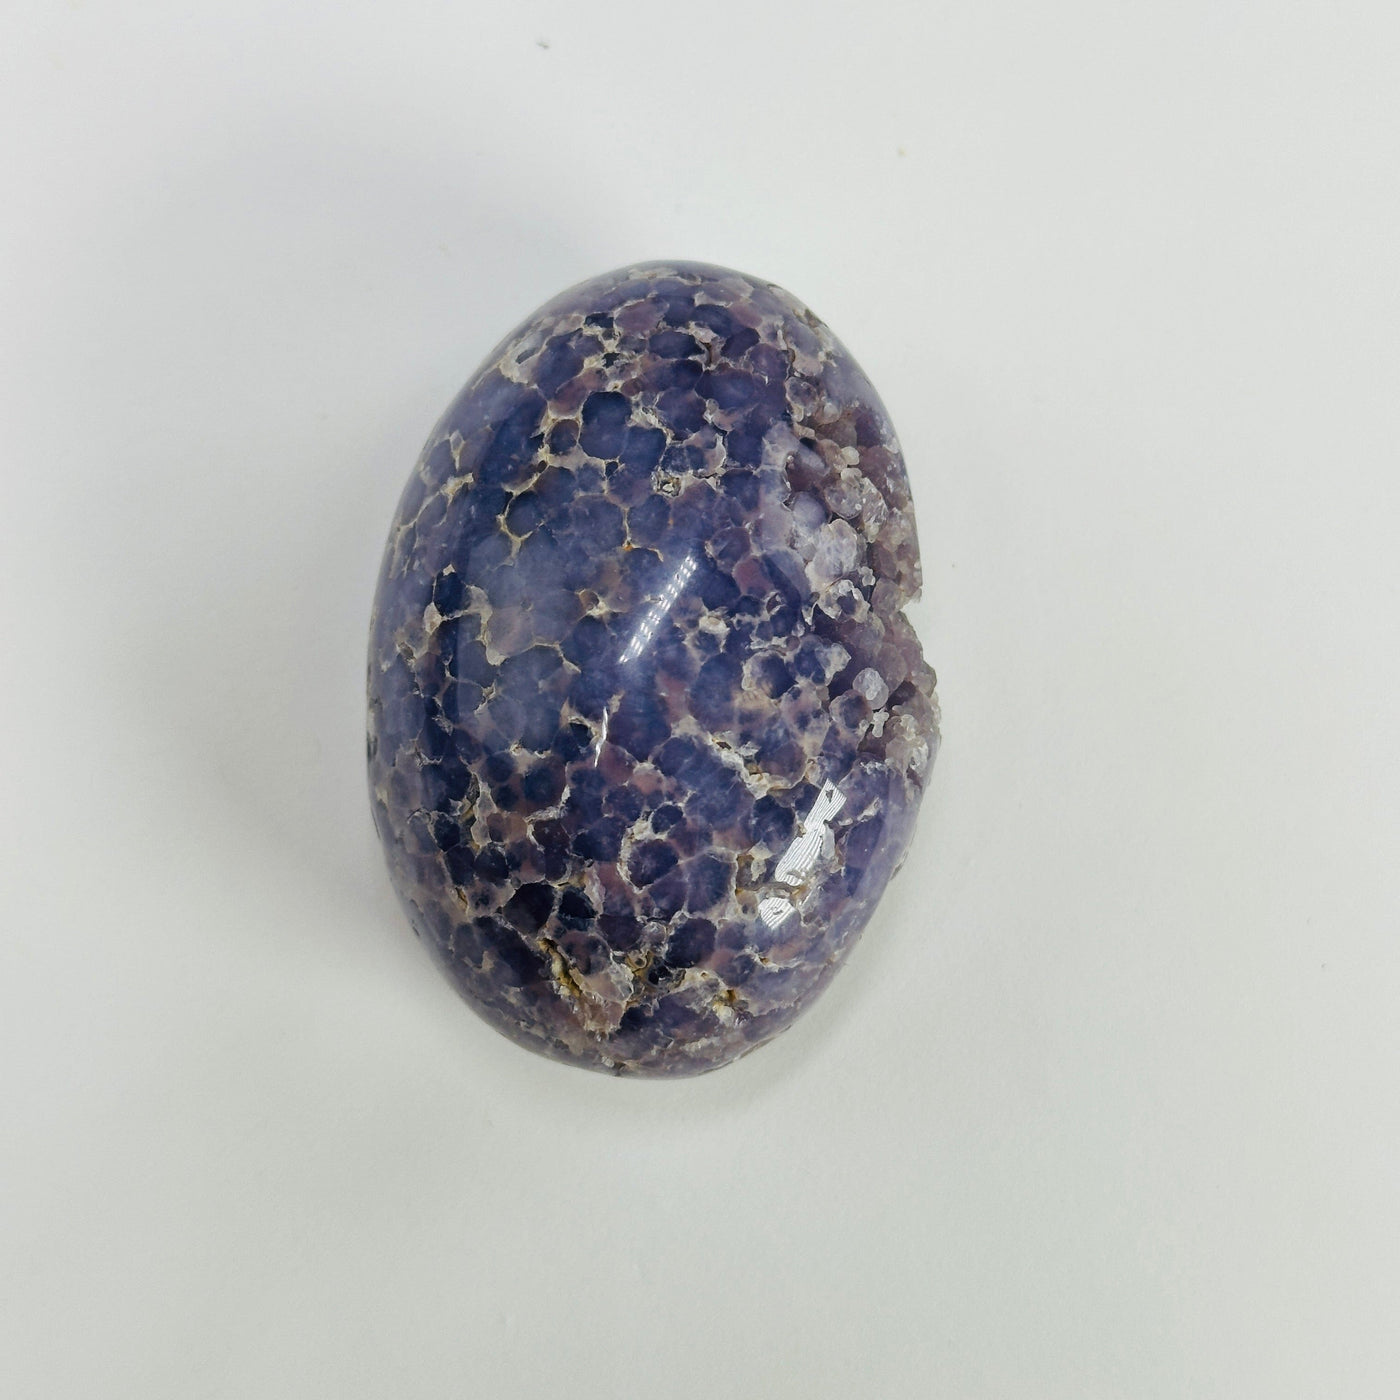 Grape agate on white background